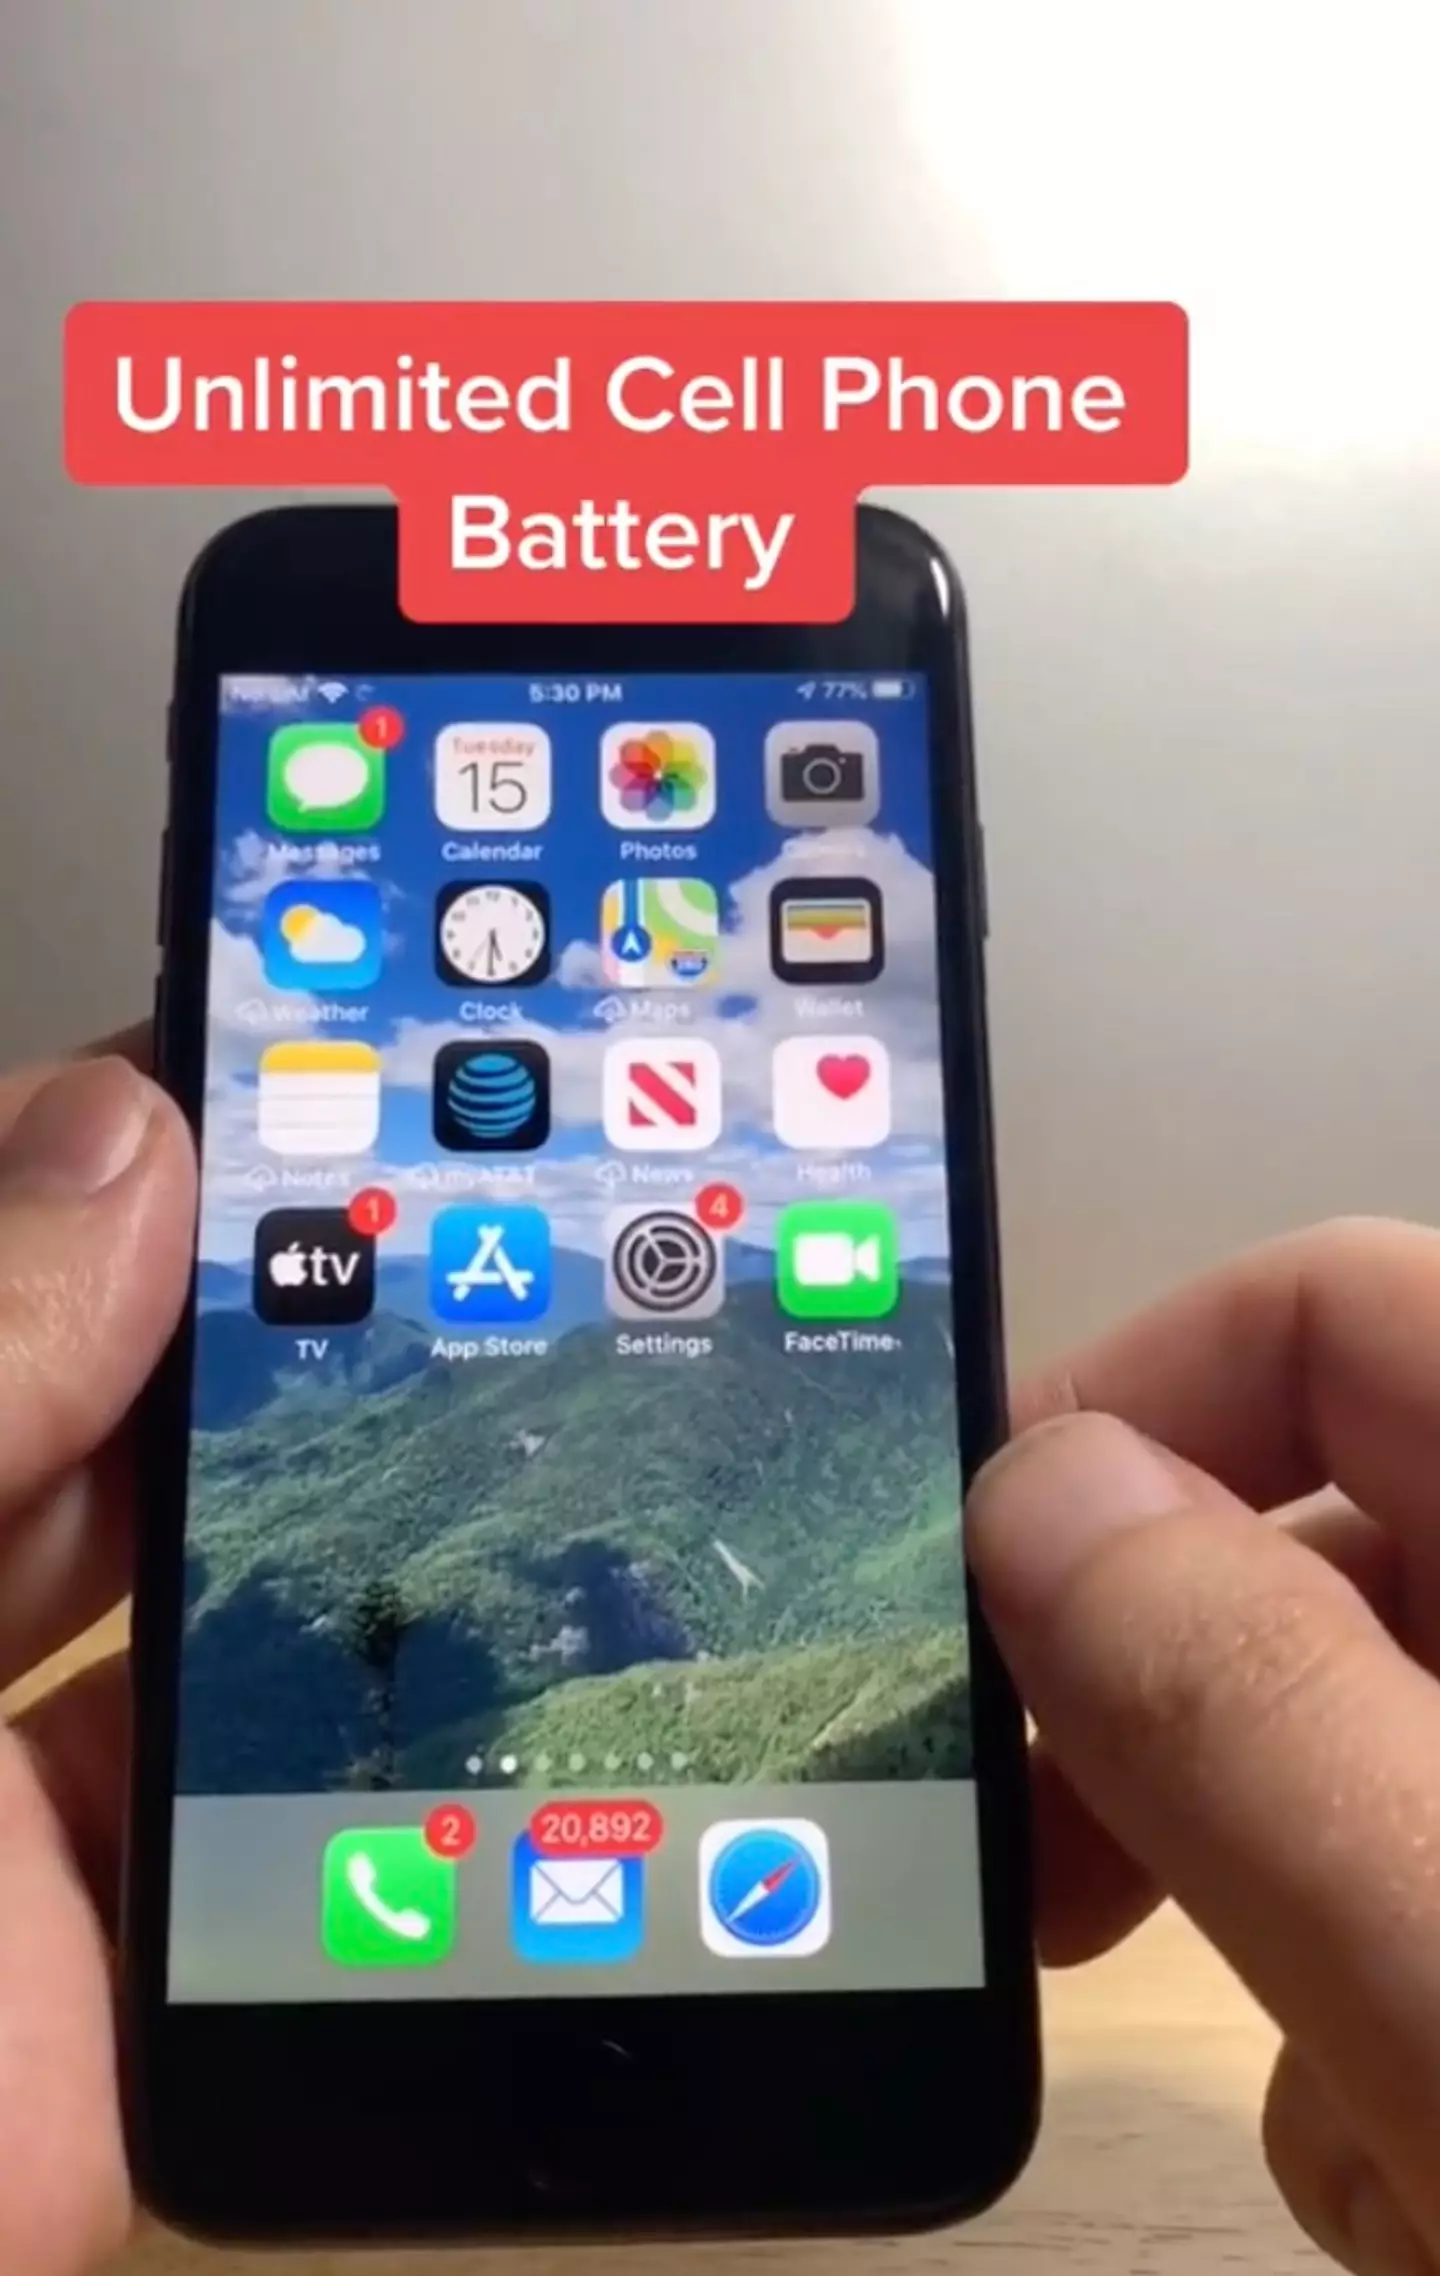 The iPhone hack supposedly gives users an unlimited battery life.